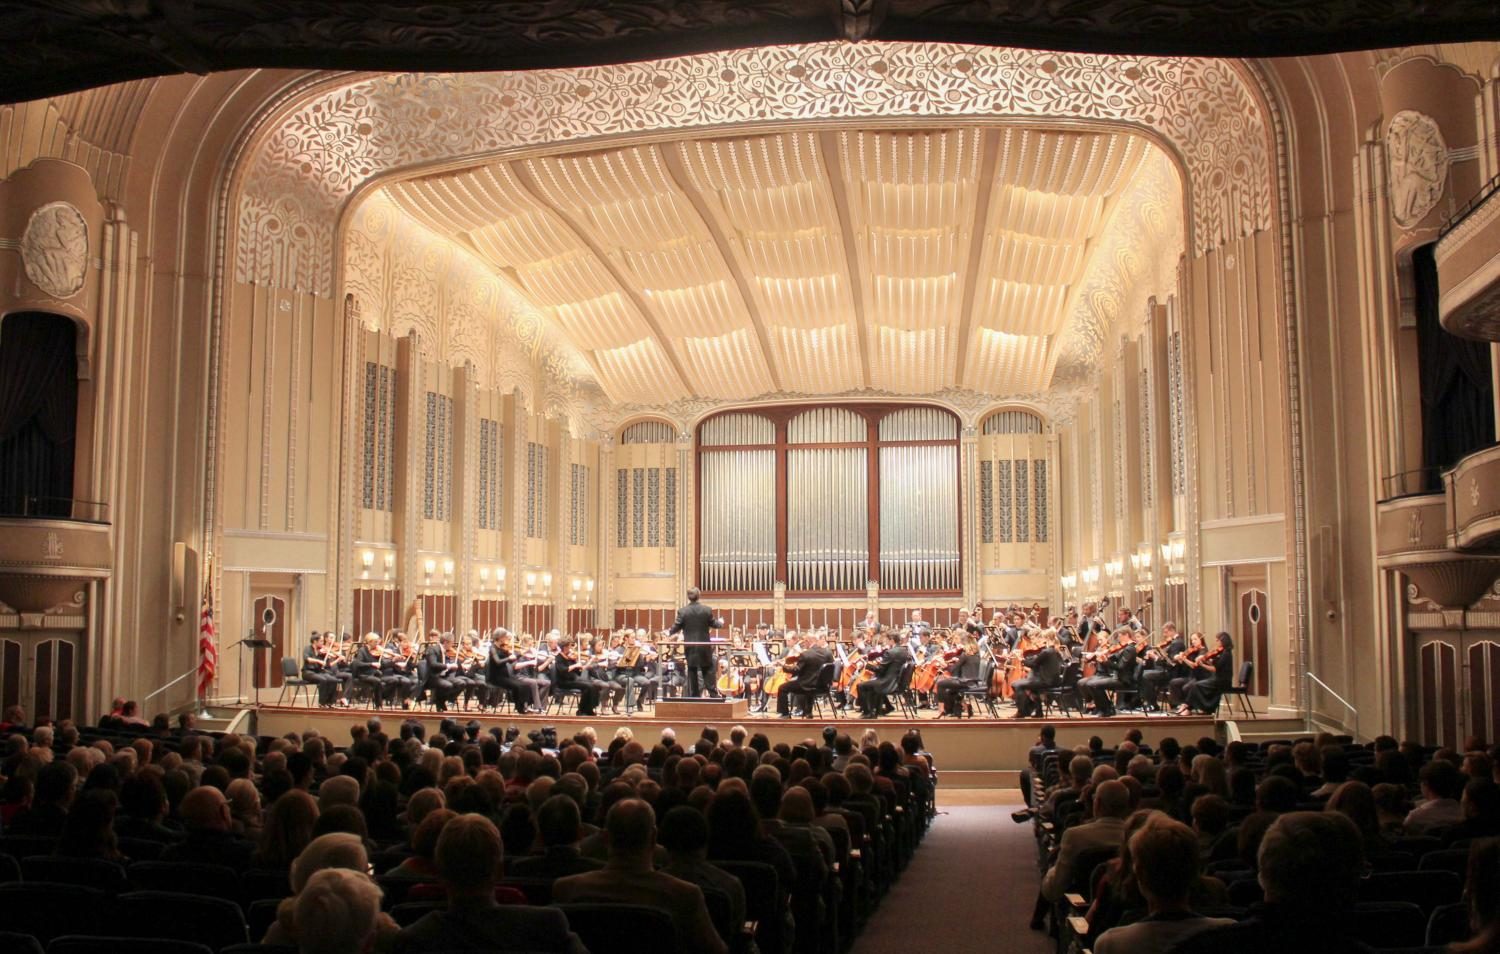 Oberlin+Conservatory+students+and+faculty+members+joined+musicians+from+the+Cleveland+Orchestra%2C+Cleveland+Institute+of+Music%2C+and+Credo+Music+to+play+a+benefit+concert+in+Cleveland%E2%80%99s+Severance+Hall+to+raise+funds+for+hurricane+relief.